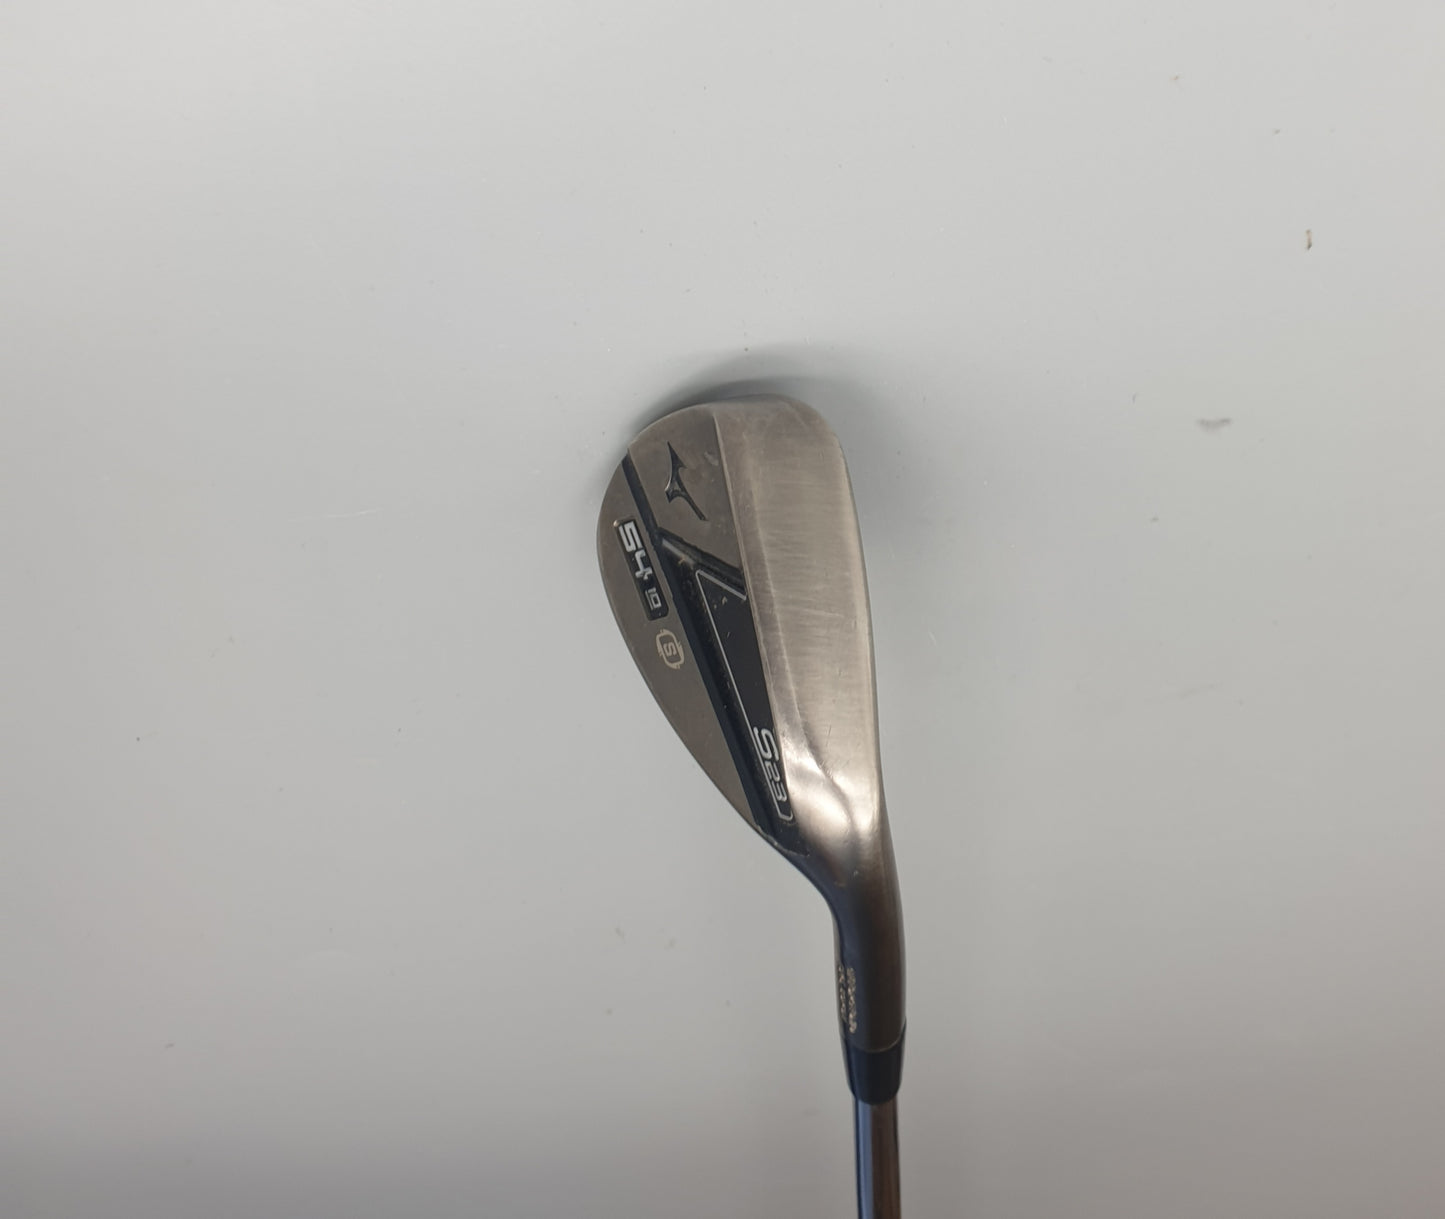 Mizuno S23 54/10 Wedge Dynamic Gold Right Hand - Used